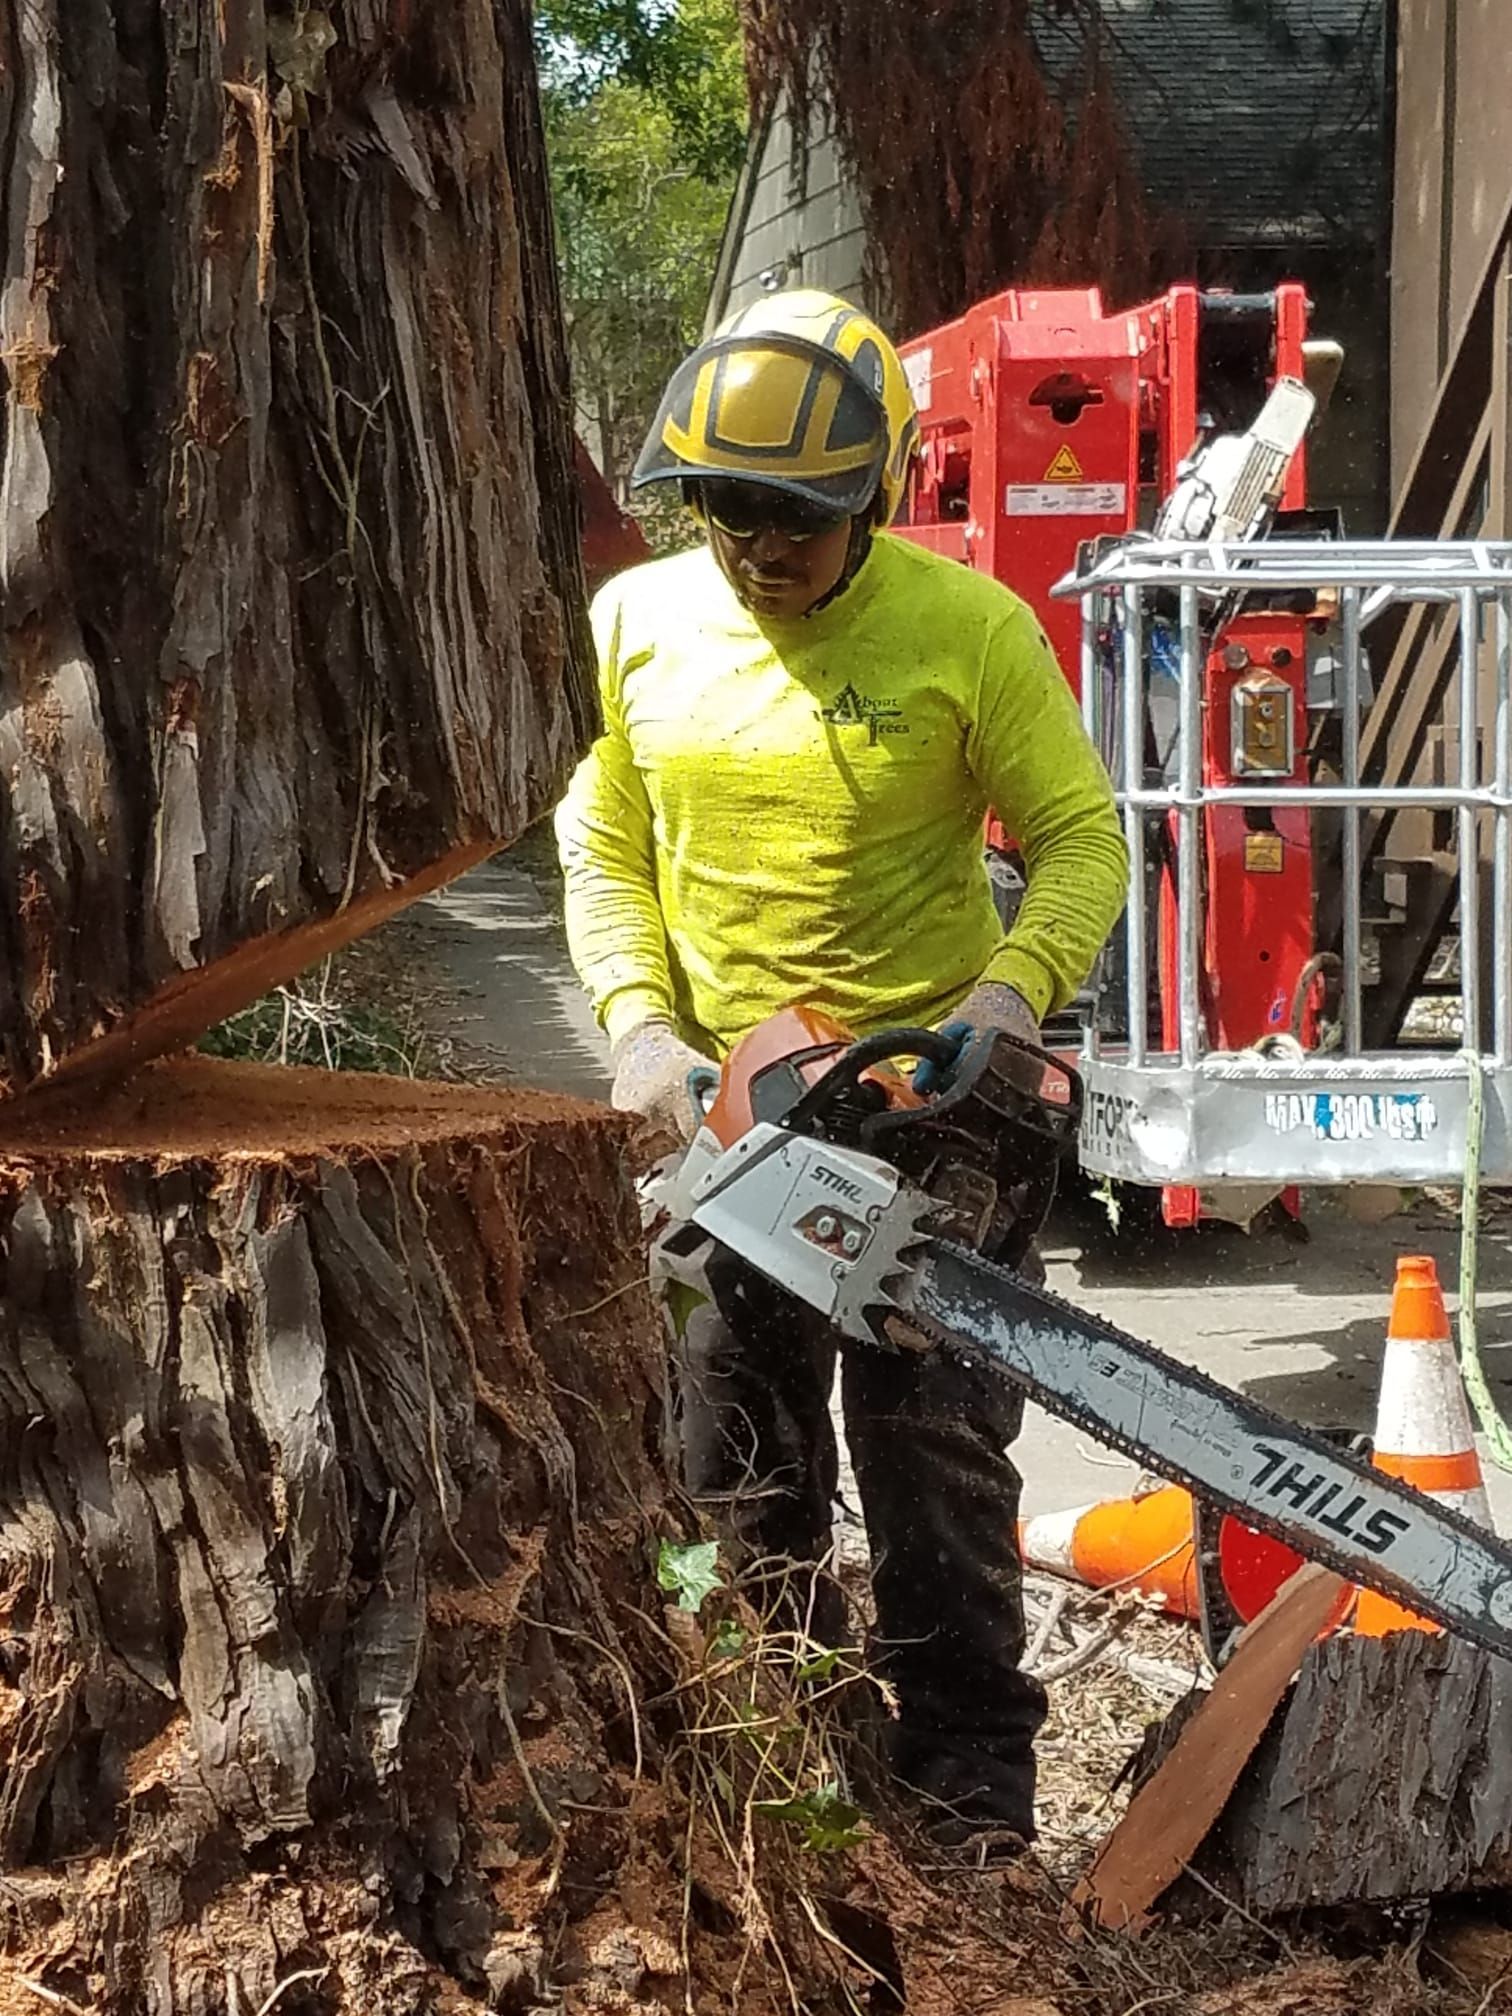 About Trees doing a tree removal in Redding, CA